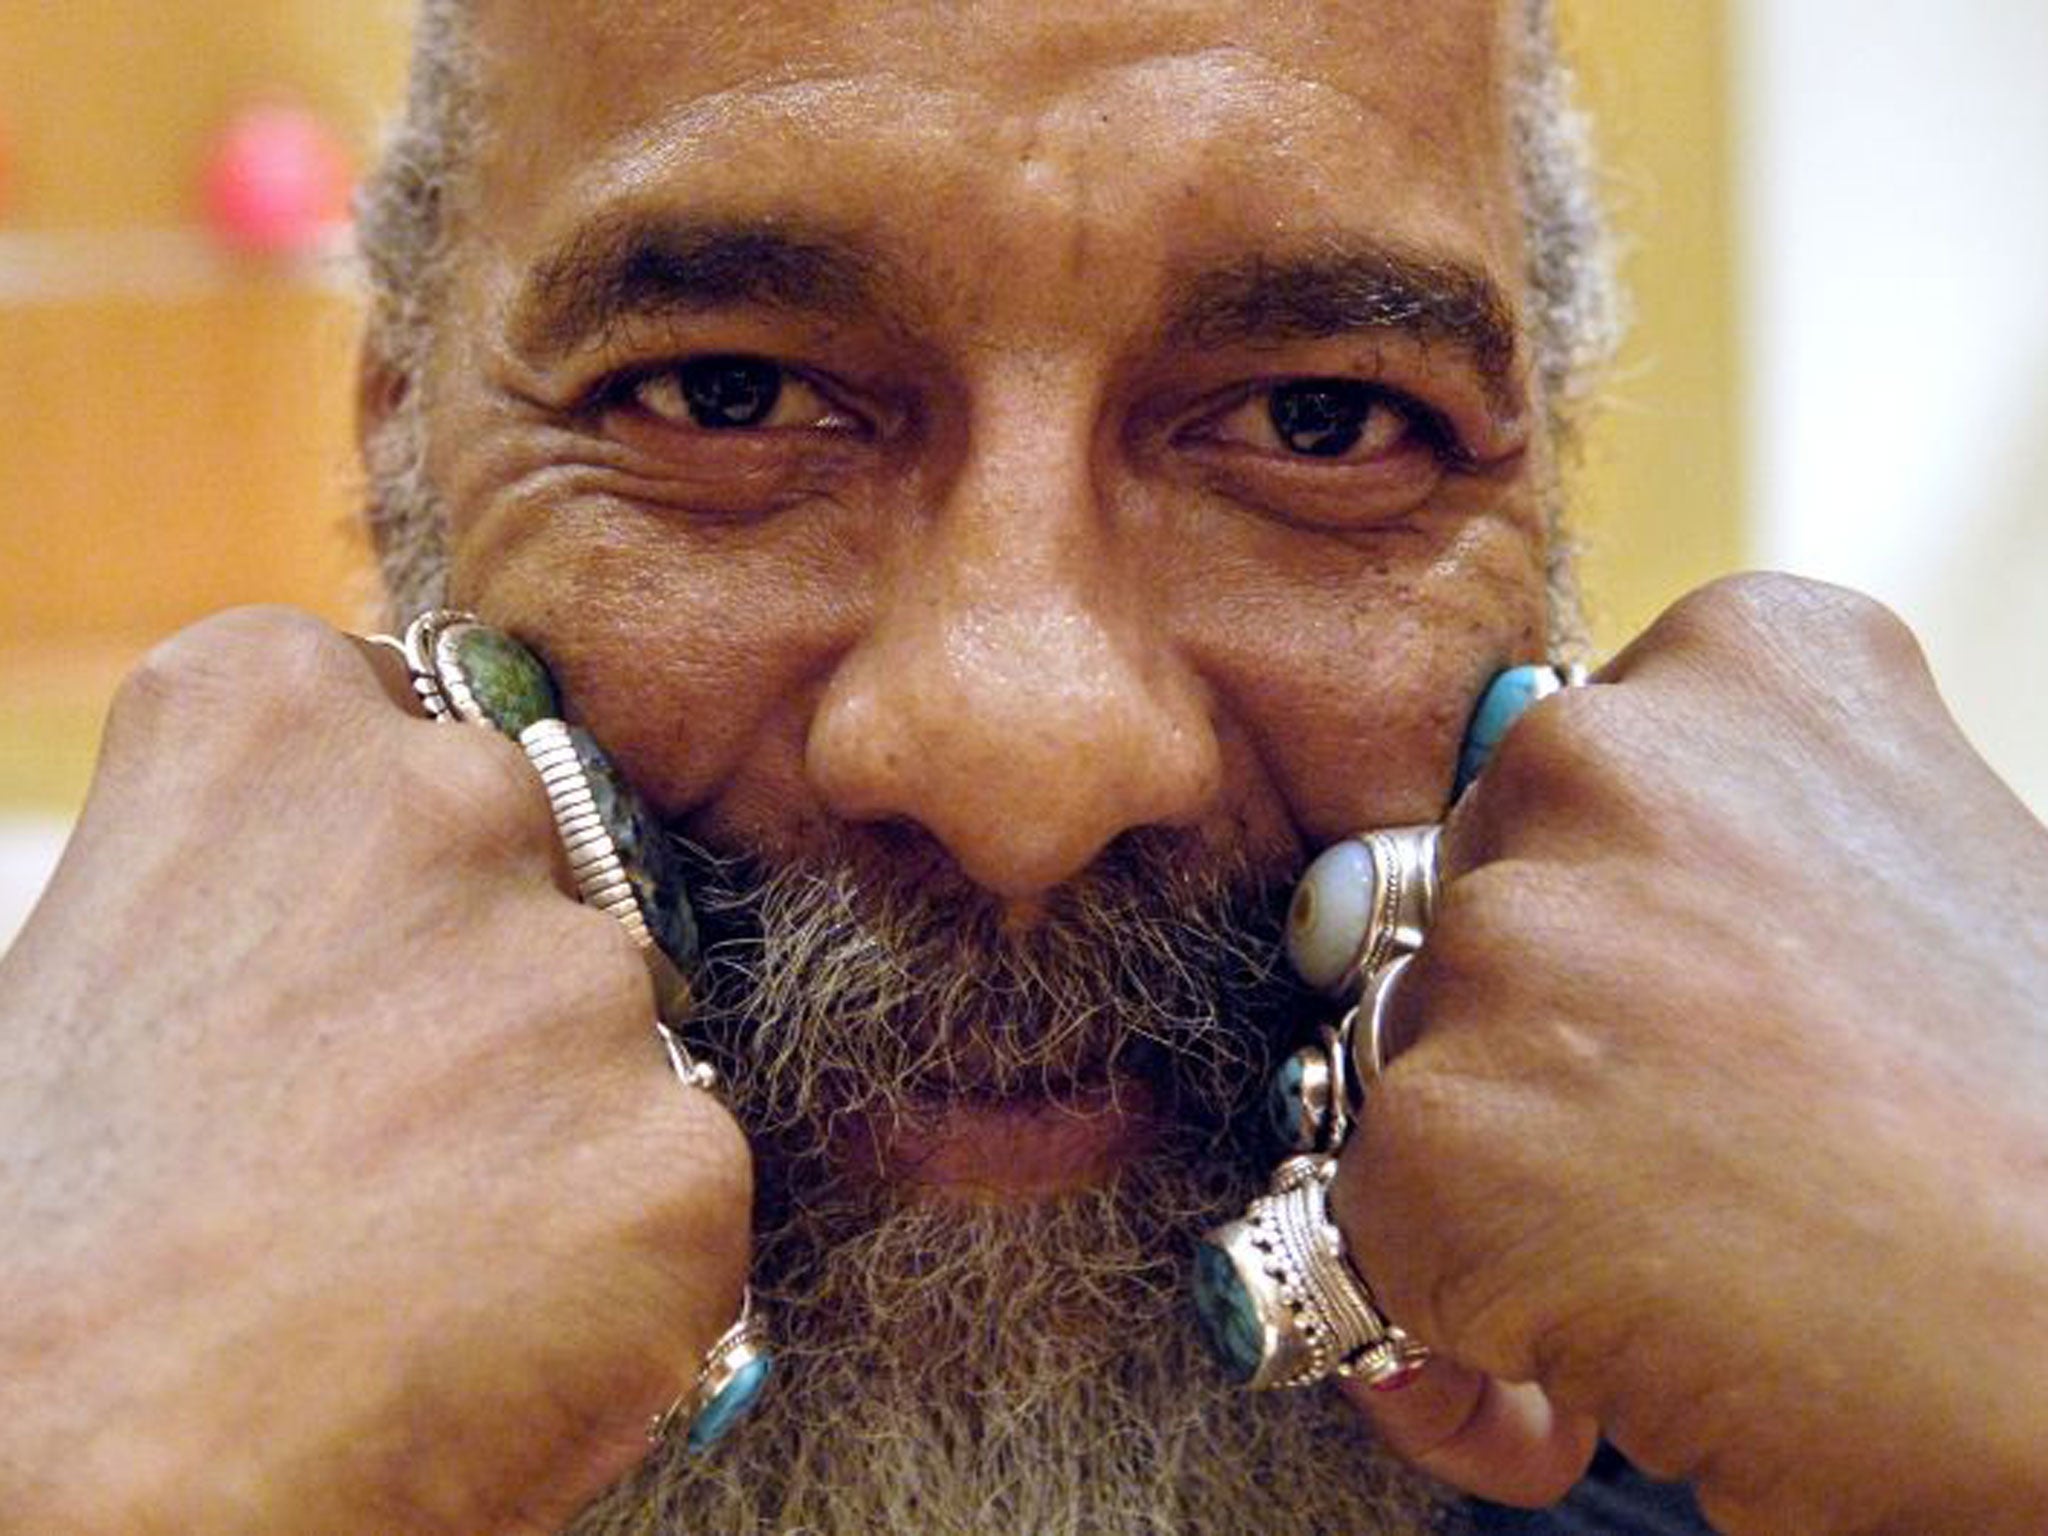 US folk musician Richie Havens has died at the age of 72